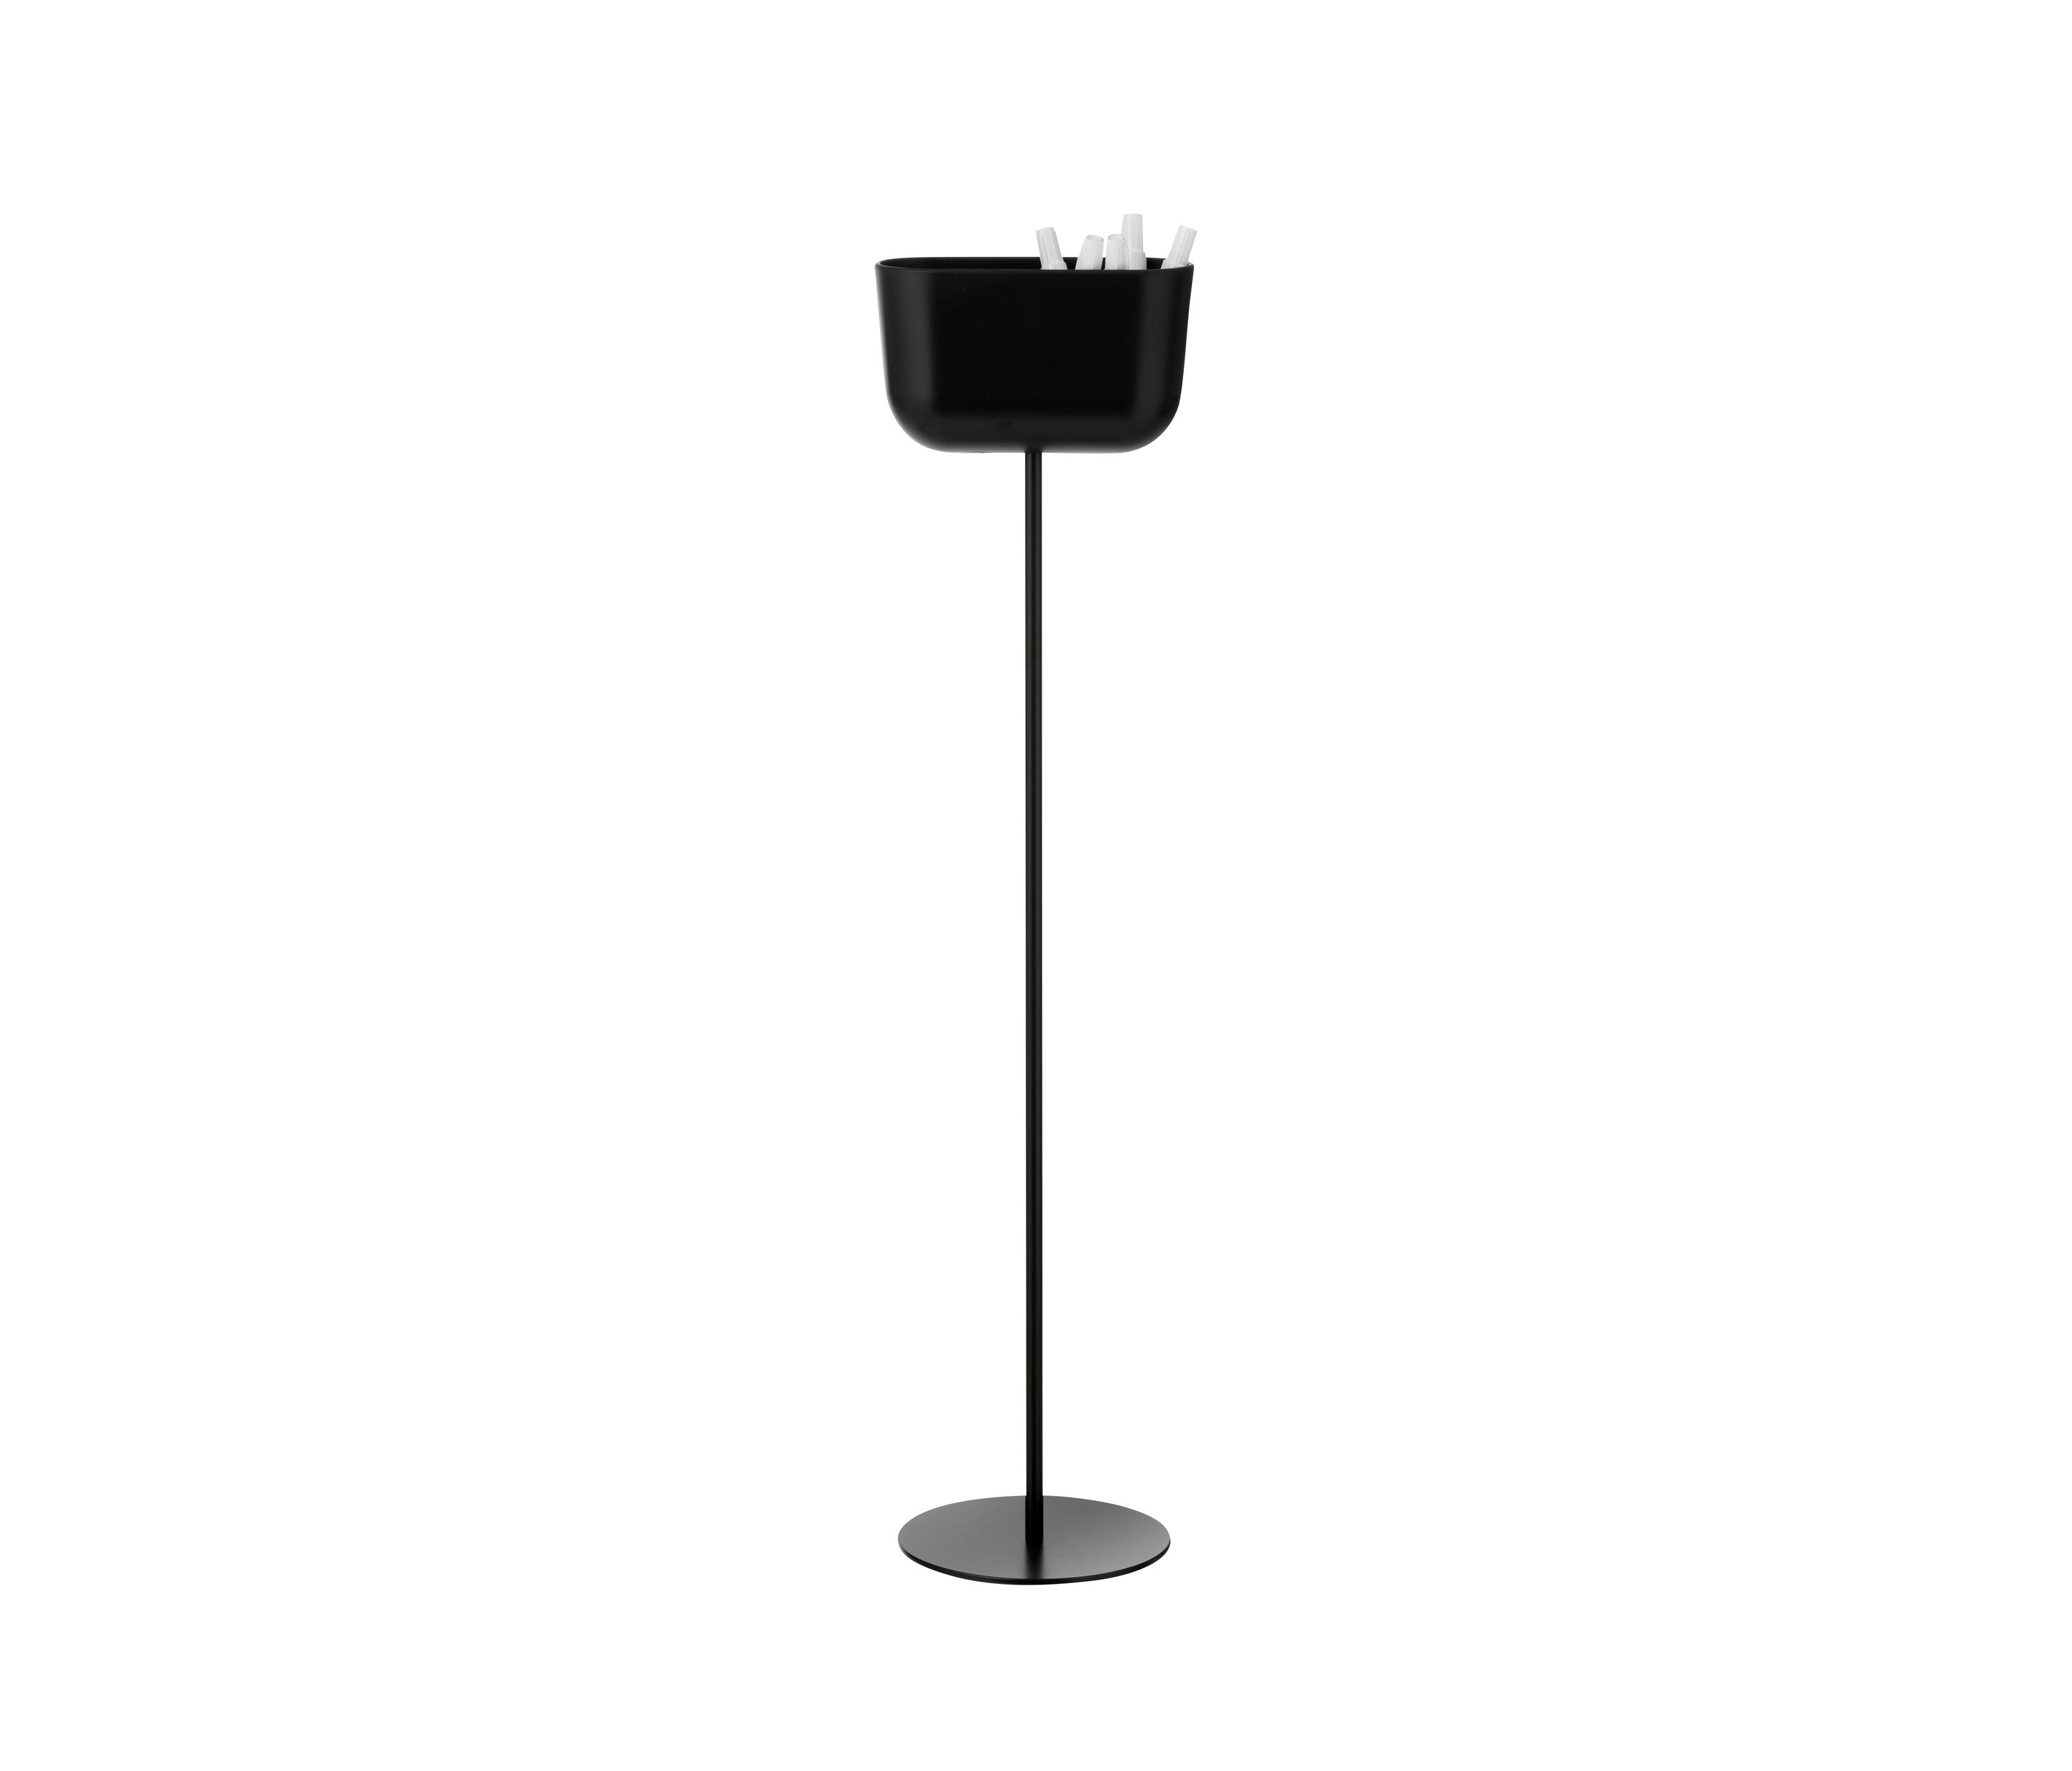 Chat Board Storage Unit Floor Stand Architonic